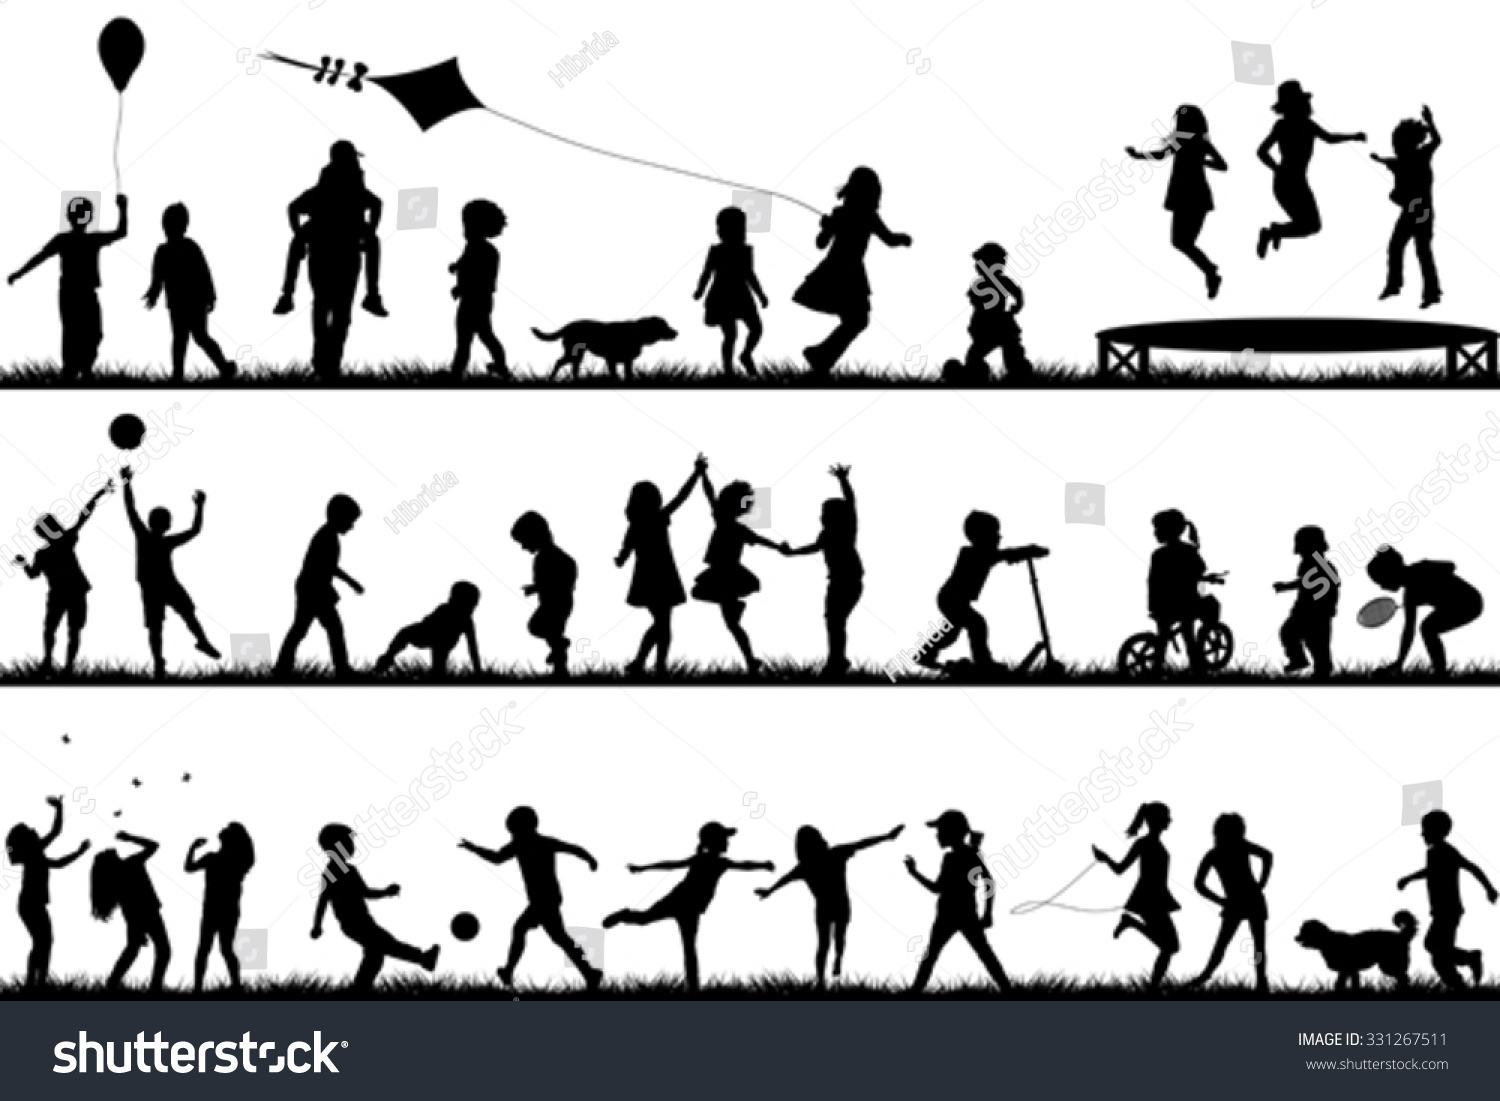 Set of children silhouettes playing outdoor #331267511